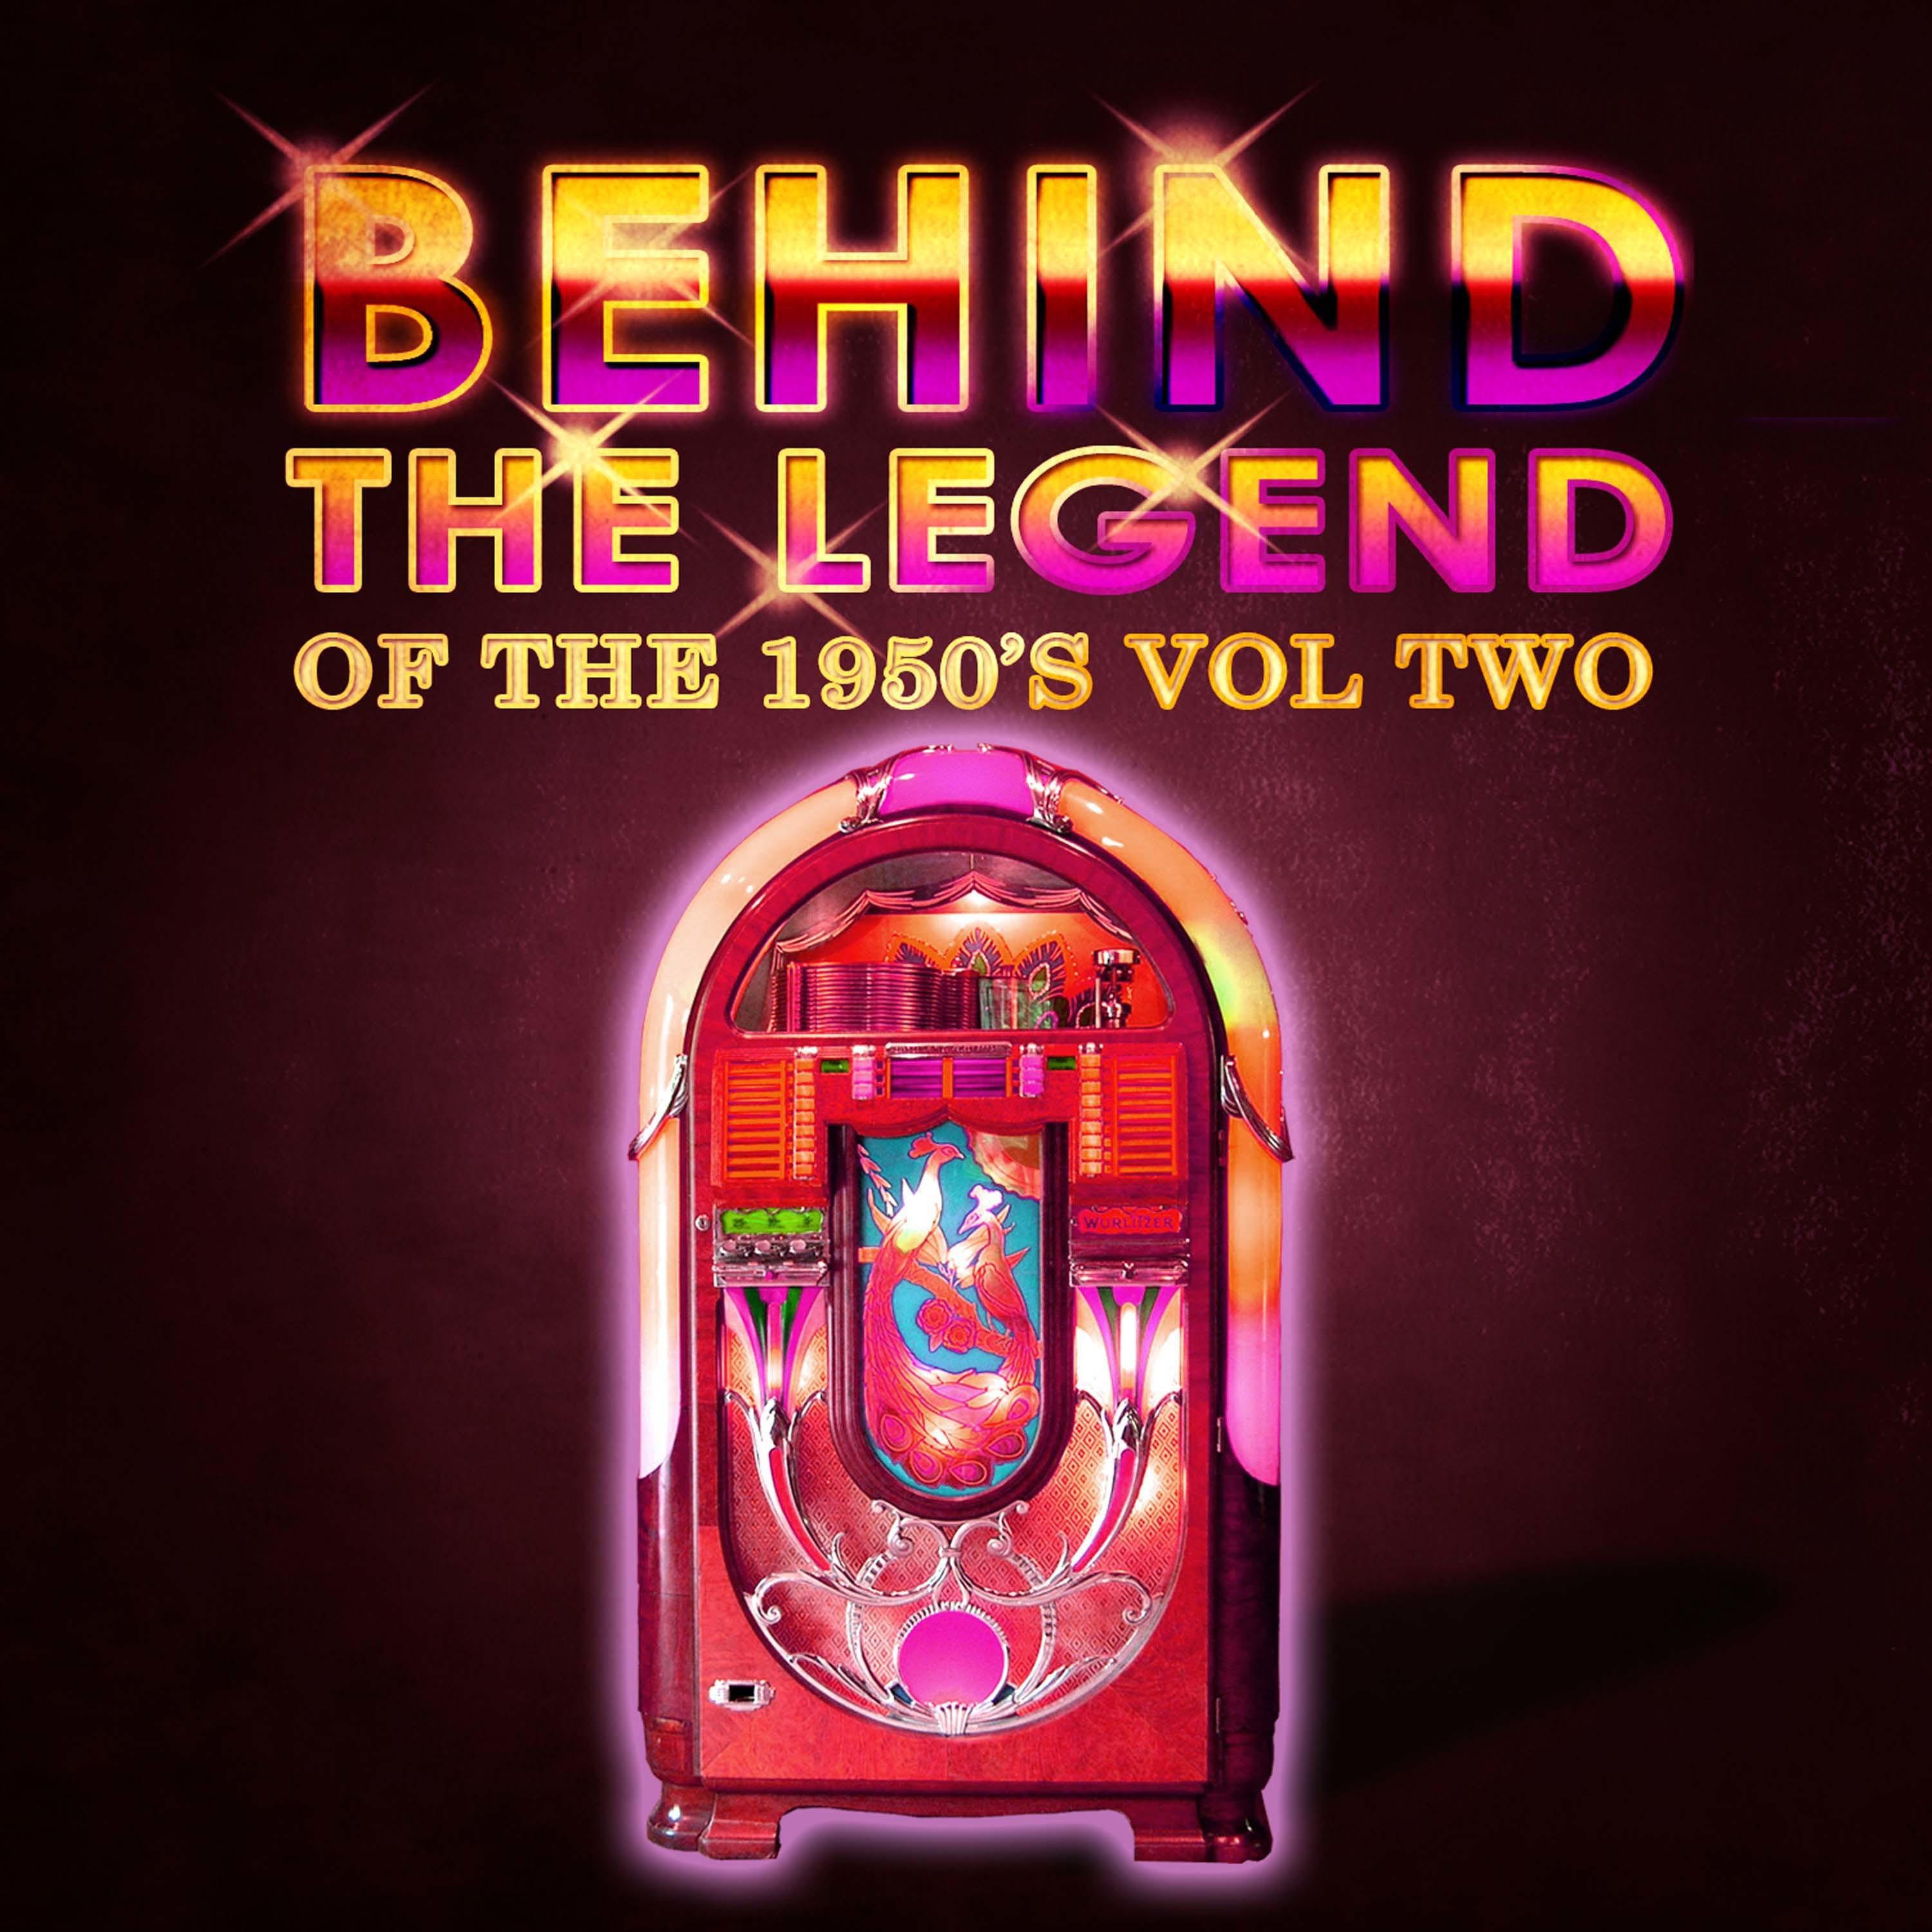 Behind The Legend Of The 50's, Vol. 2